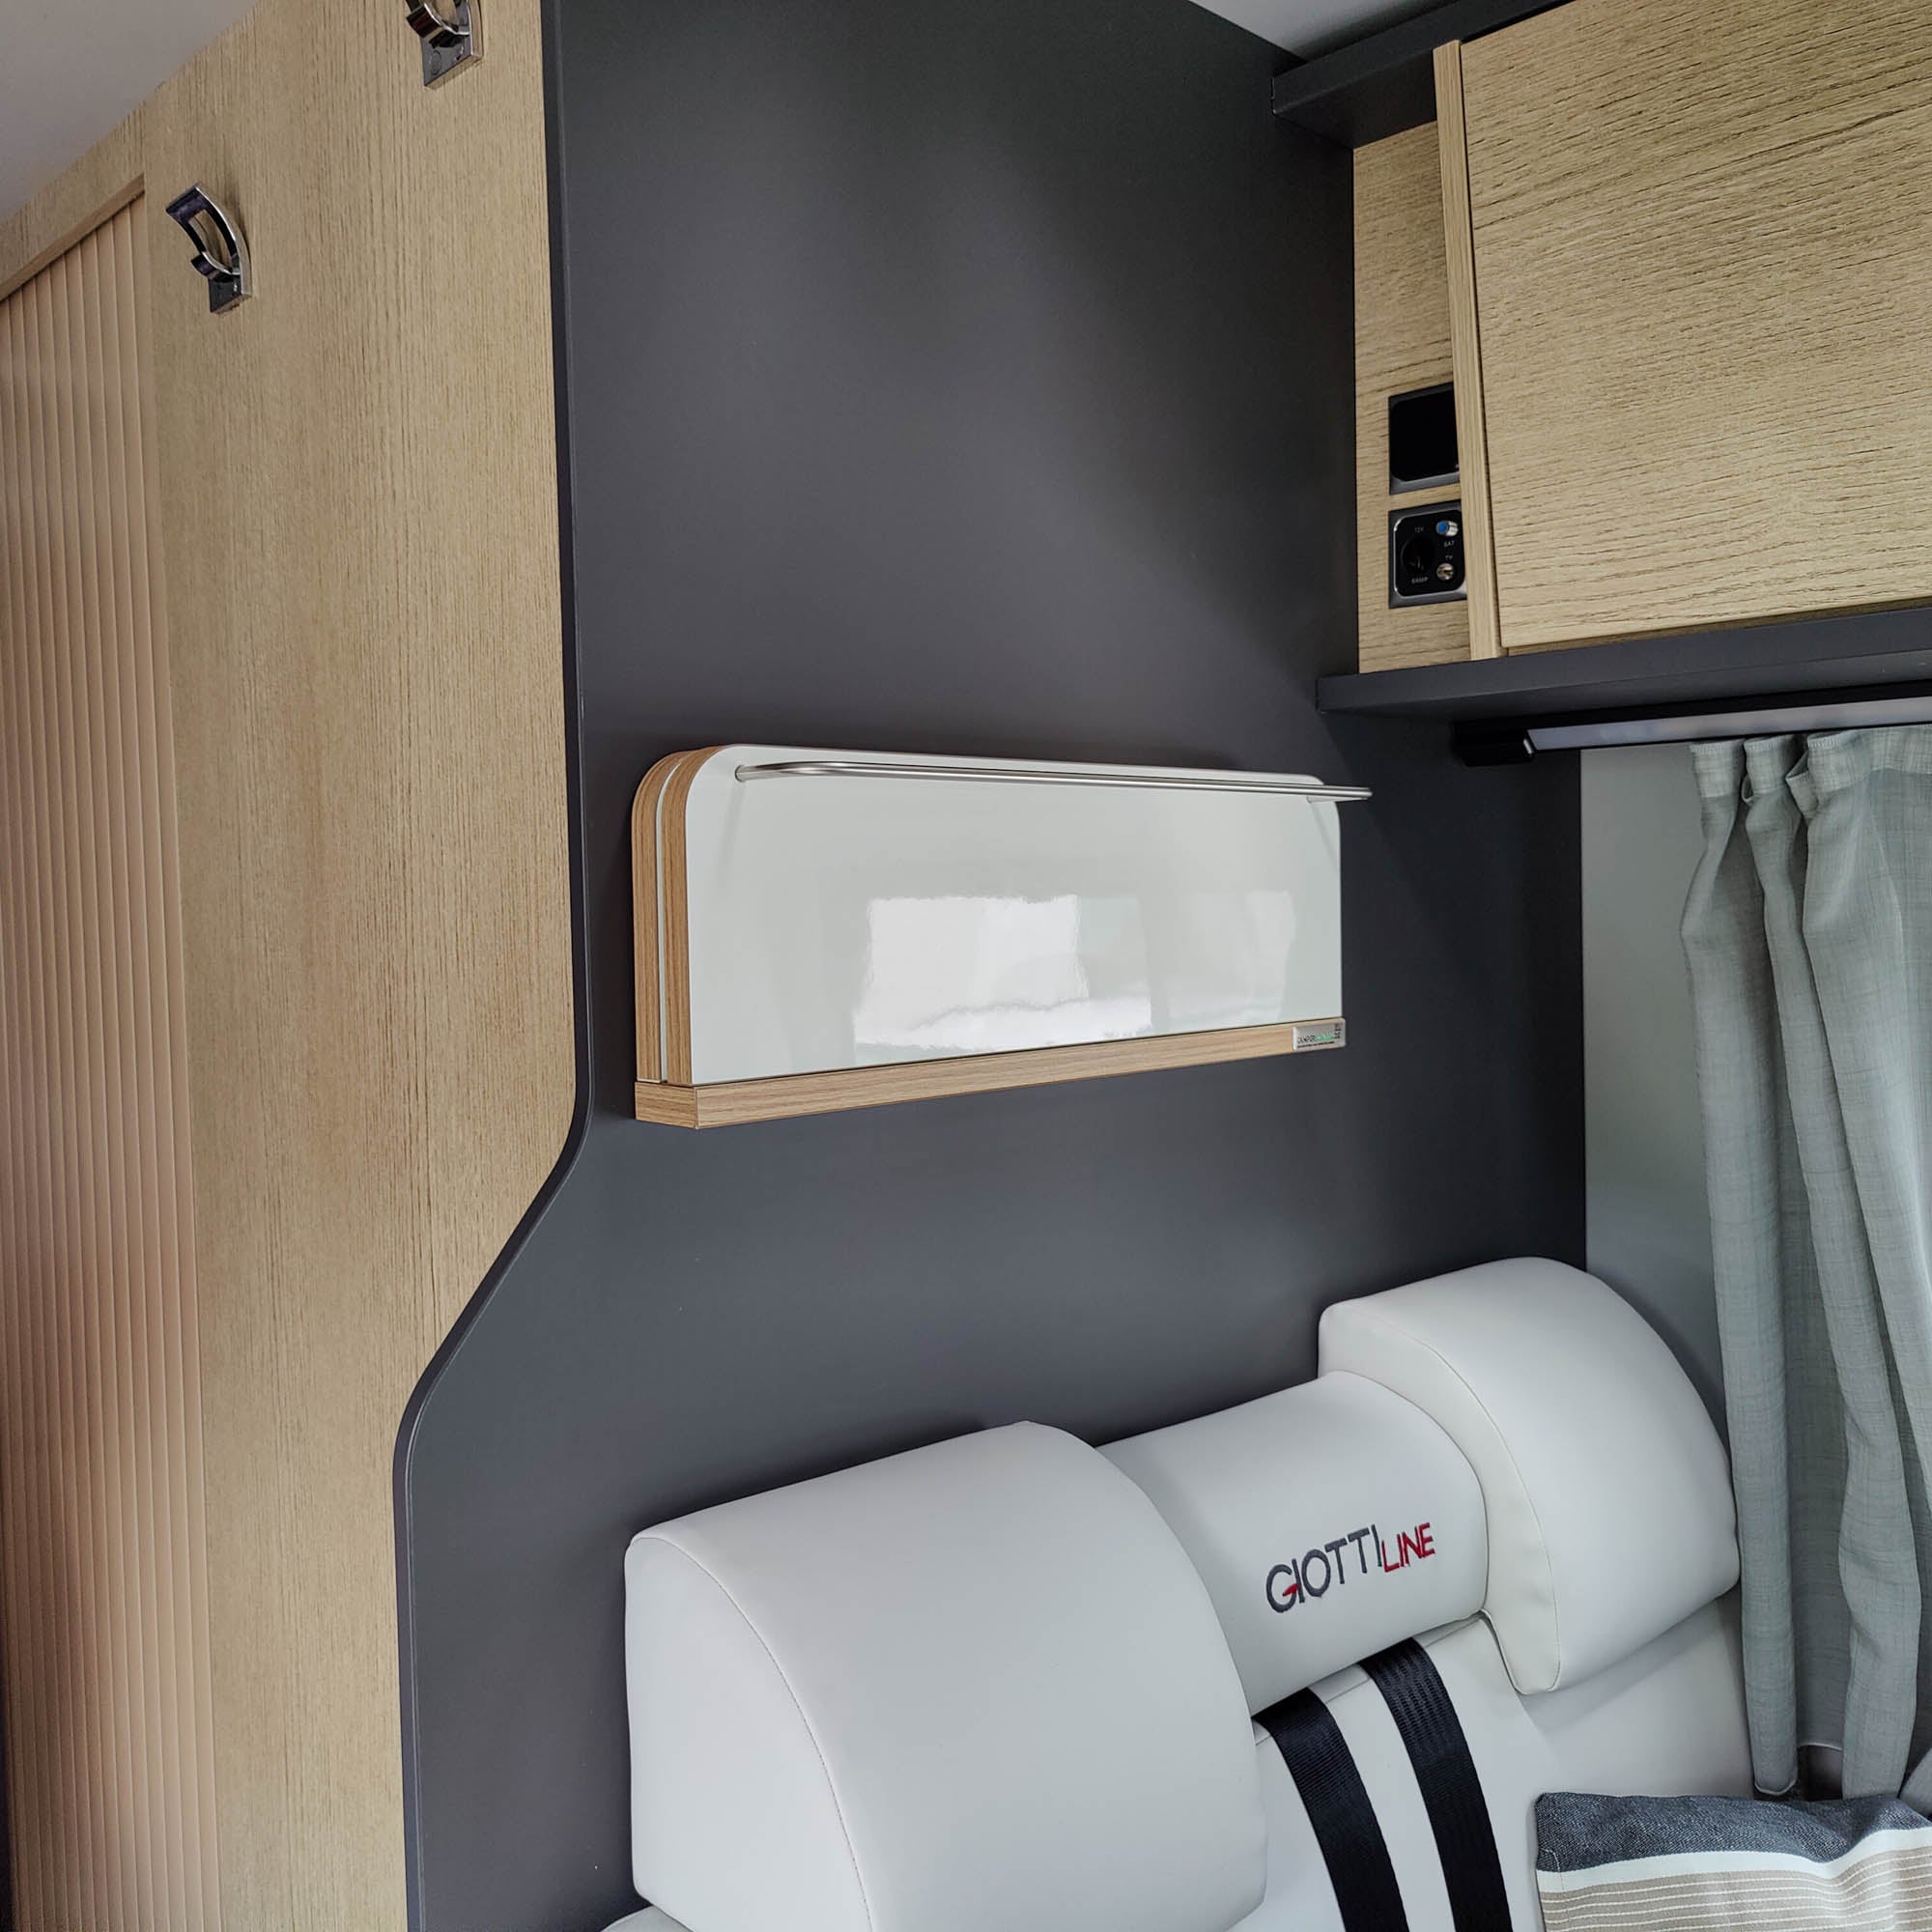 More space in the motorhome